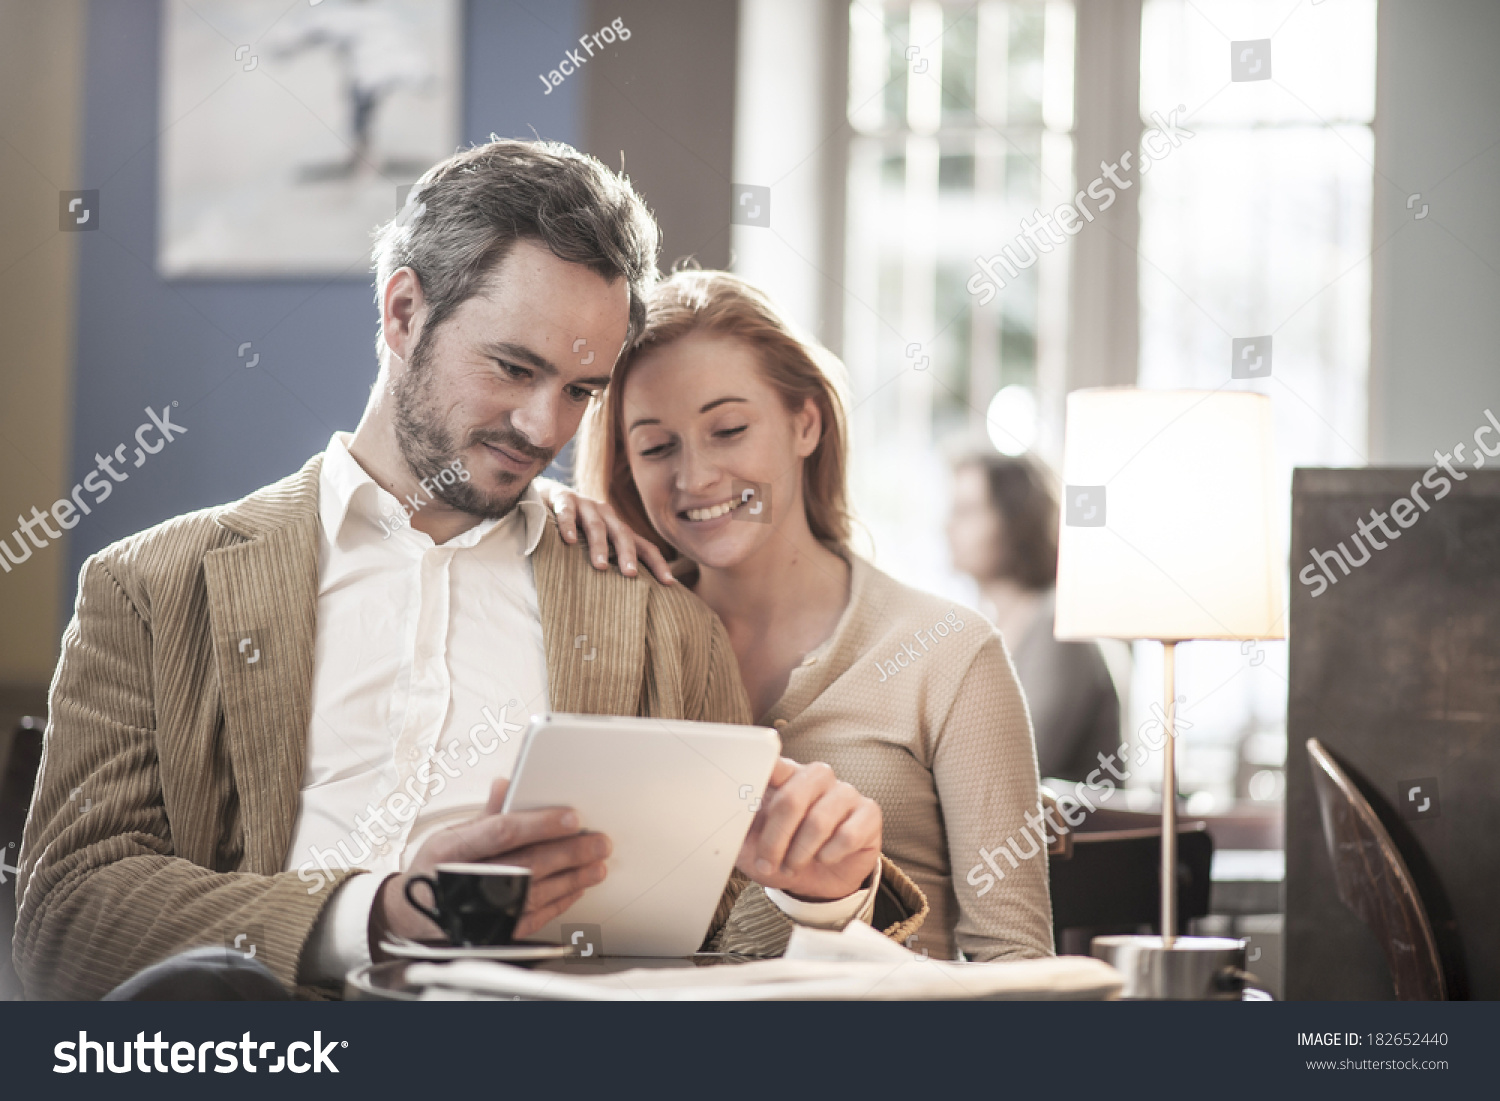 cheerful couple sitting in a cafe and using a digital tablet #182652440